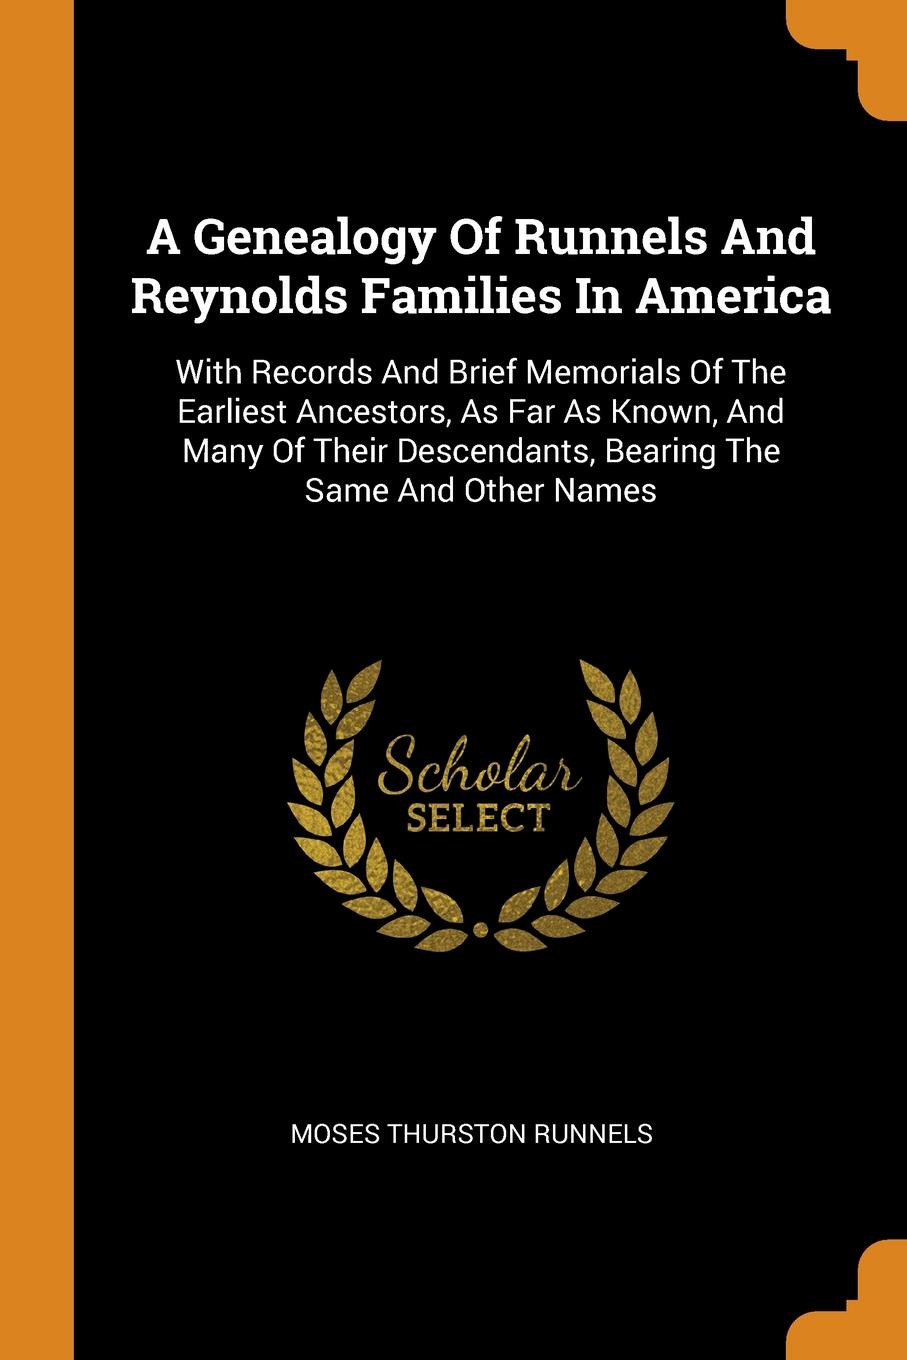 A Genealogy Of Runnels And Reynolds Families In America. With Records And Brief Memorials Of The Earliest Ancestors, As Far As Known, And Many Of Their Descendants, Bearing The Same And Other Names